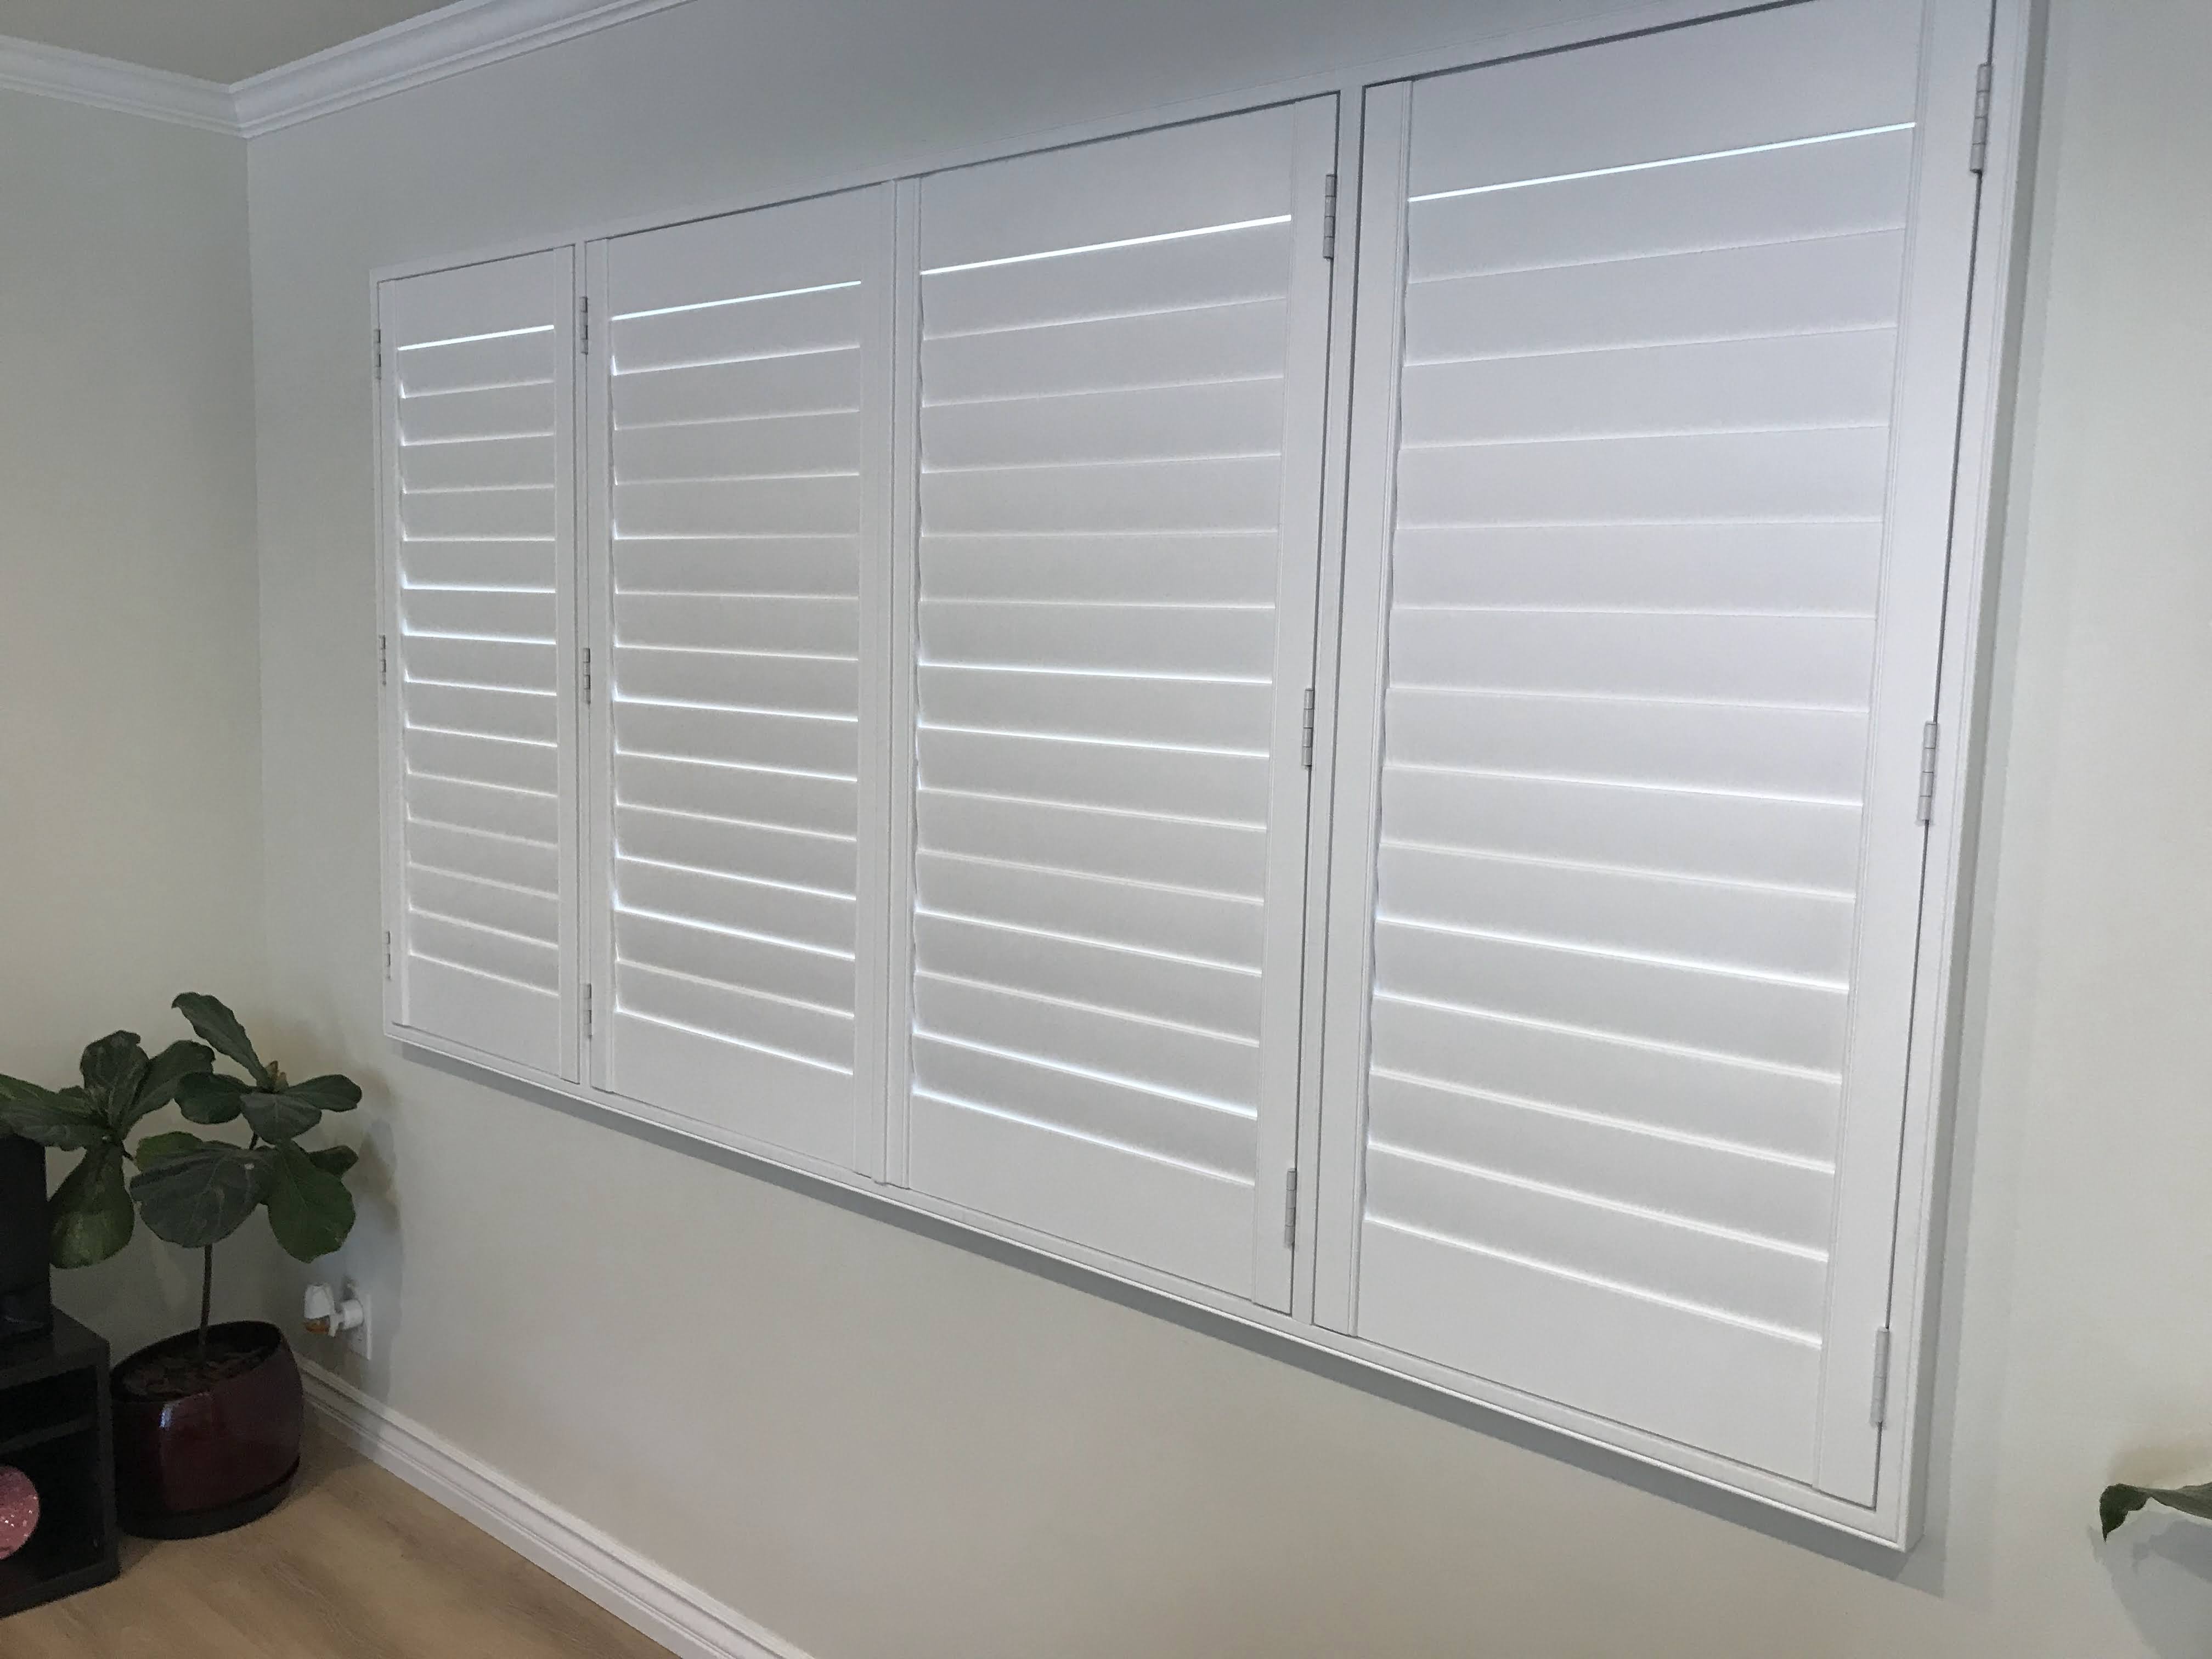 Find highly-rated and affordable flooring, doors, plantation shutters and paint